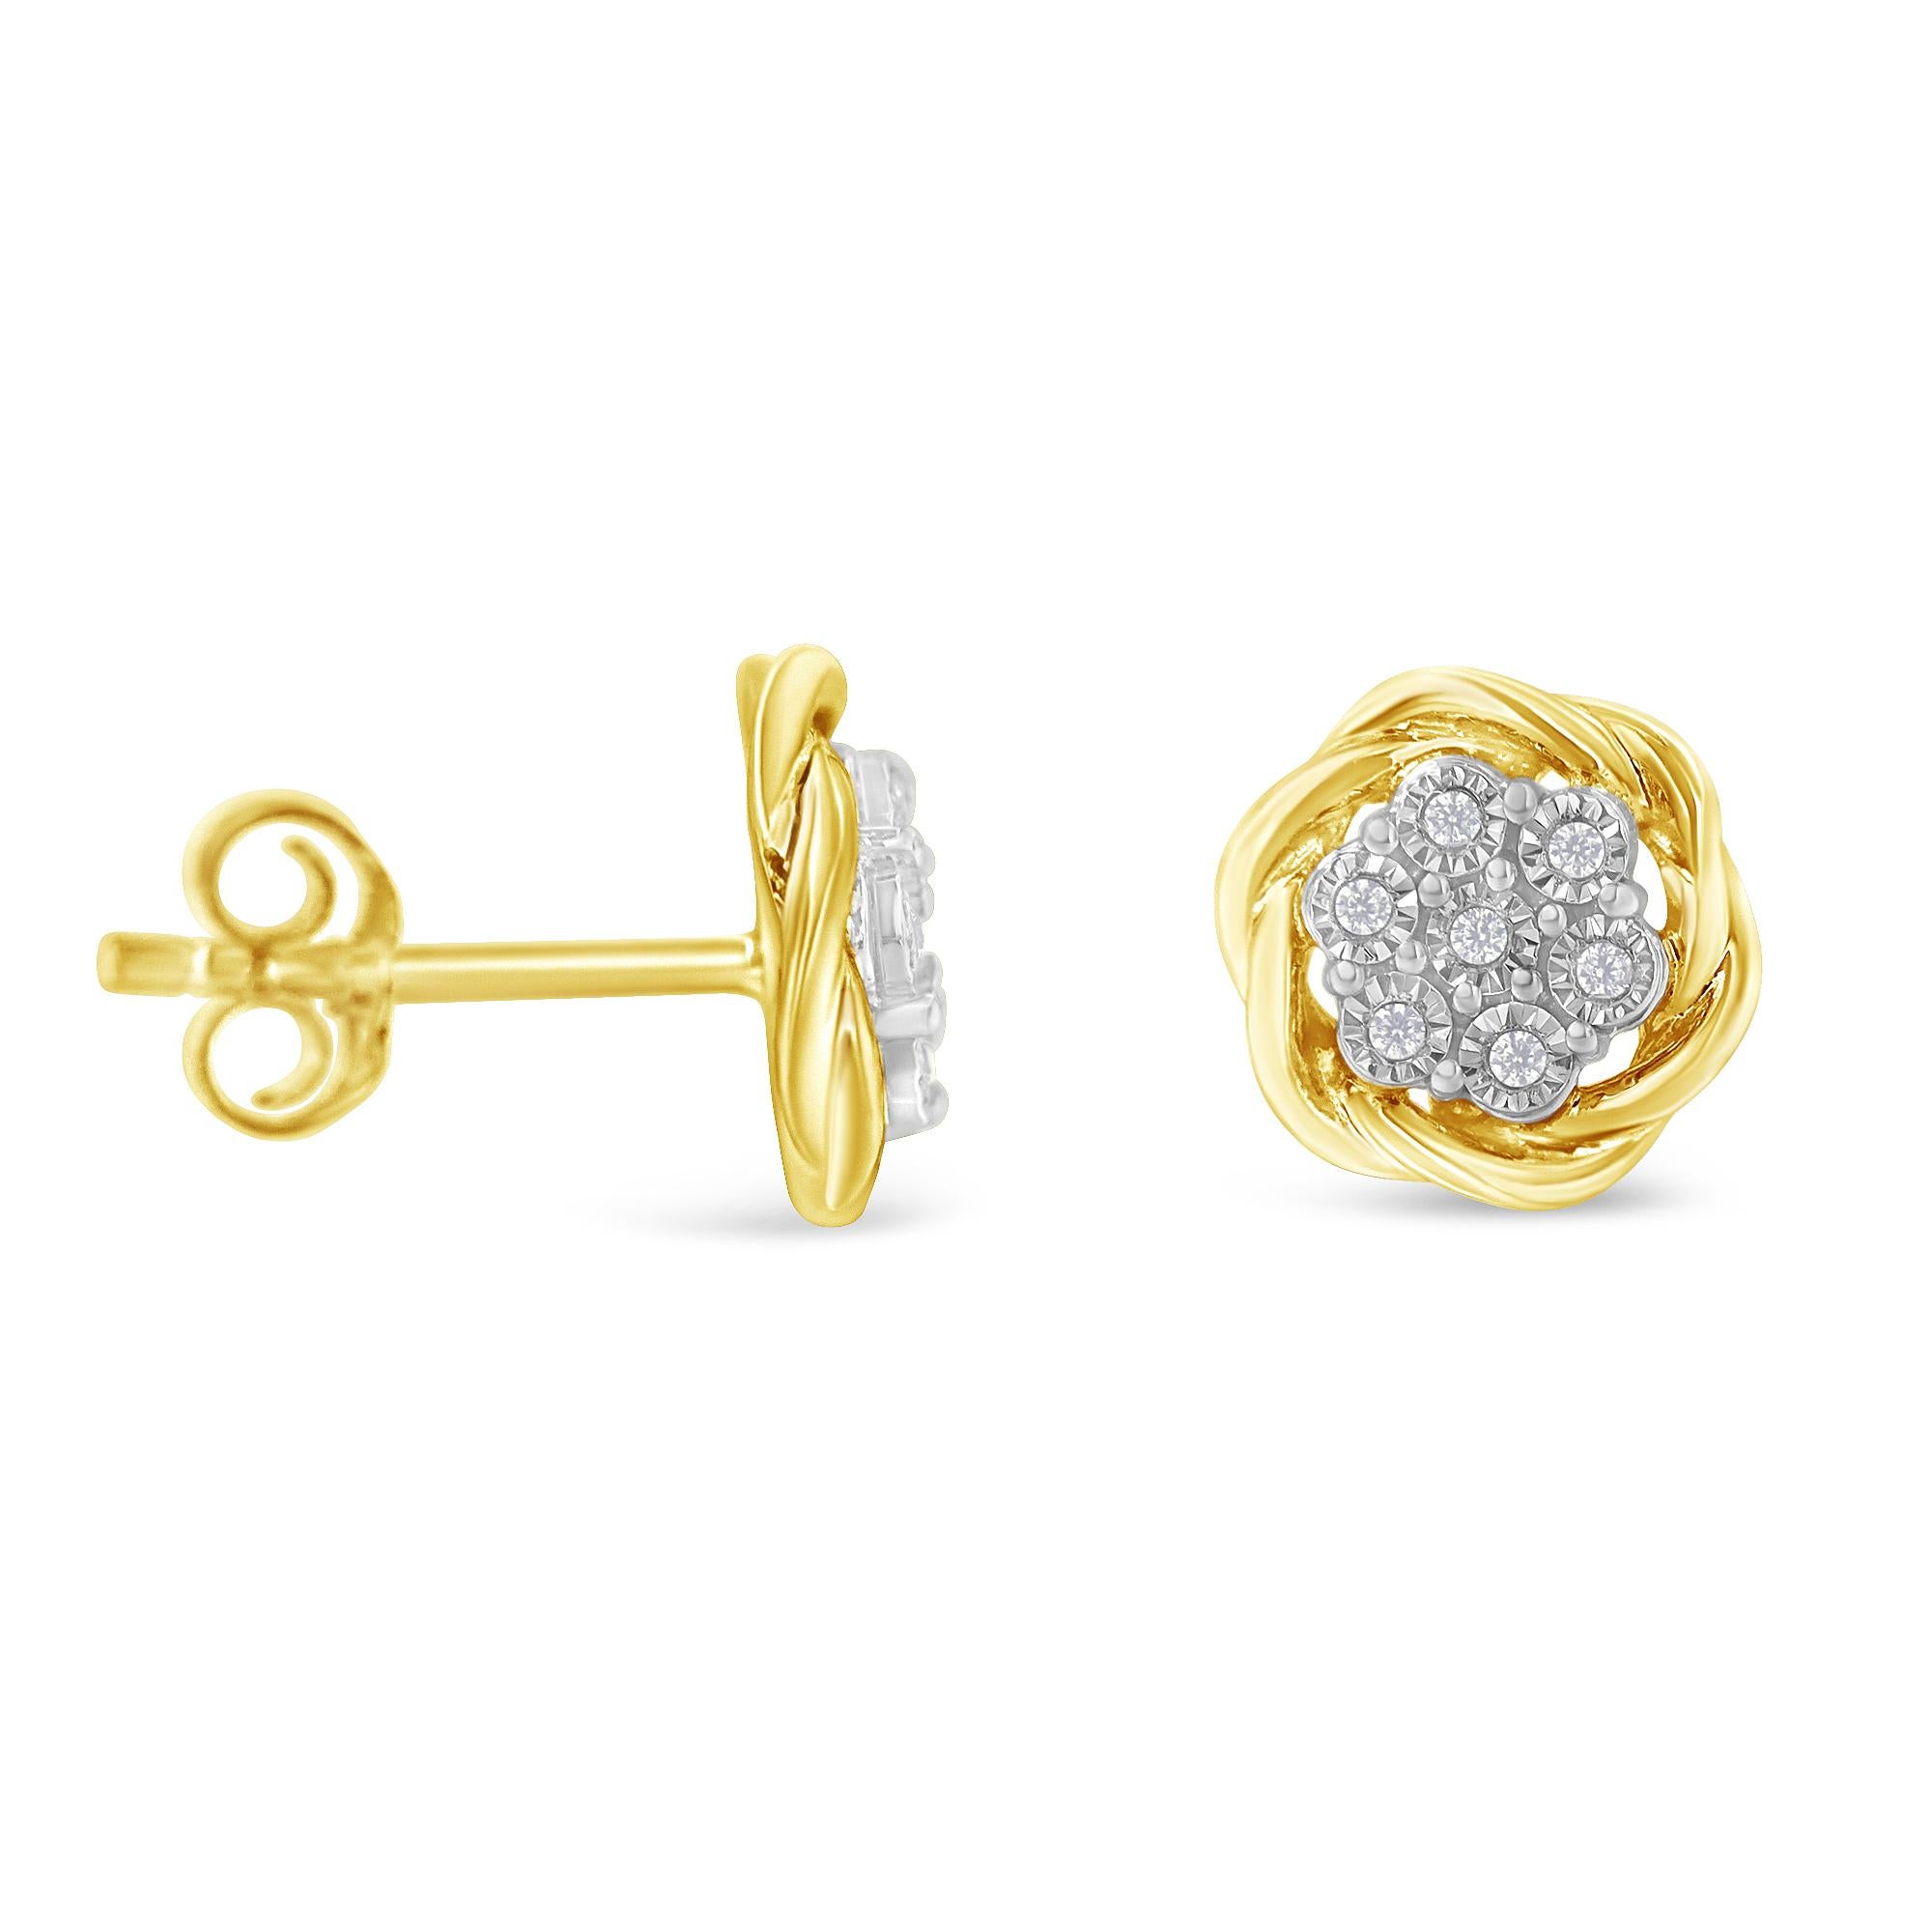 Marvelous rose accent stud earrings that feature genuine diamonds in a yellow gold plated colored surface. They are made from the most refined .925 sterling silver. These earrings include a total of 14 round-cut diamonds in a miracle setting. The